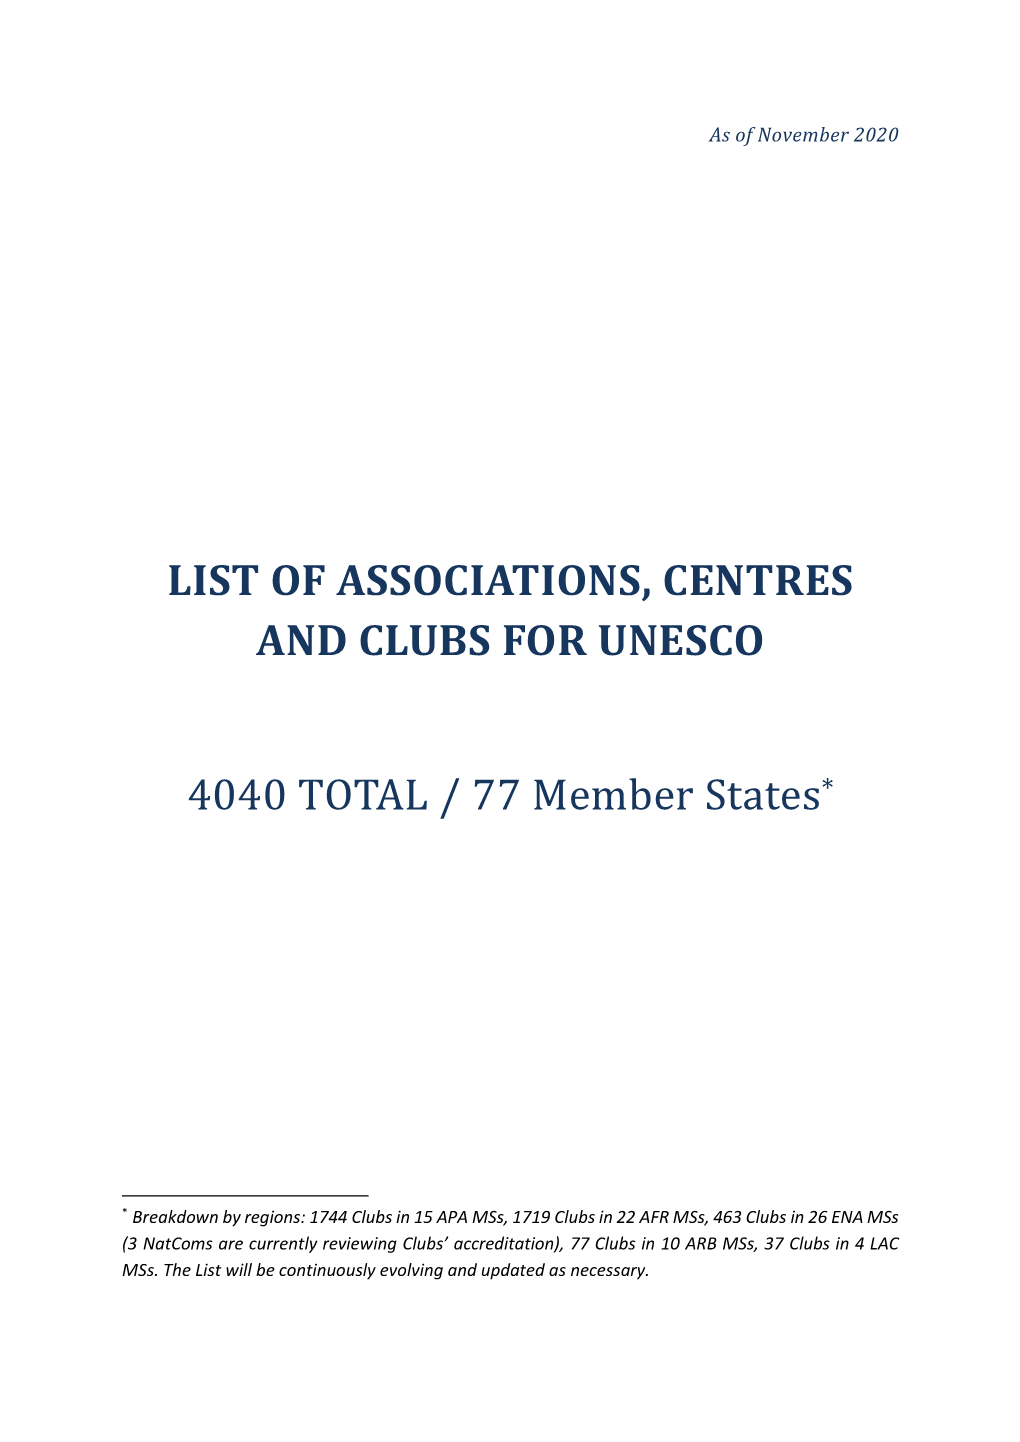 List of Associations, Centres and Clubs for Unesco 4040